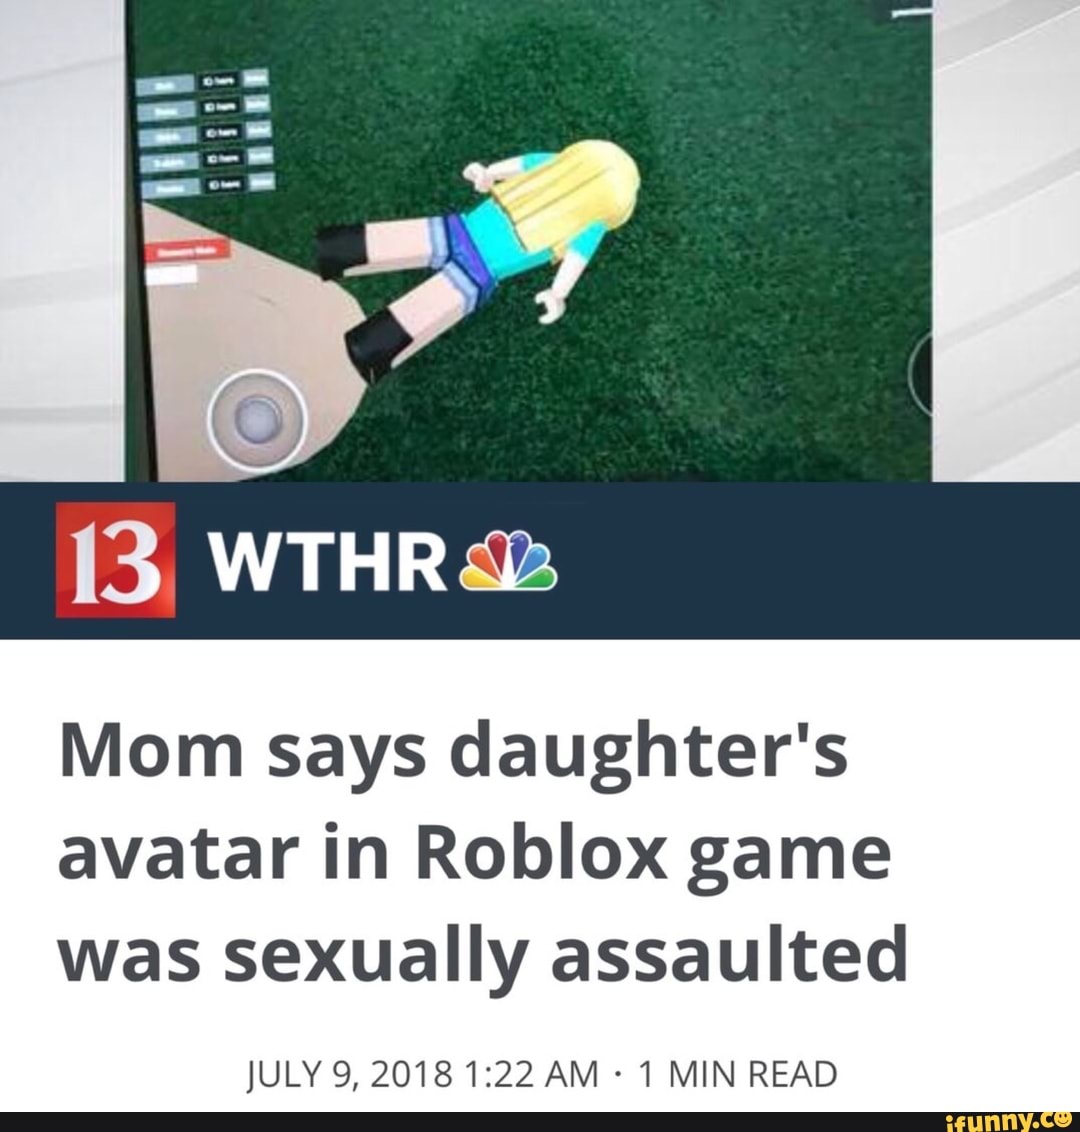 Roblox Avatar Sexually Assaulted